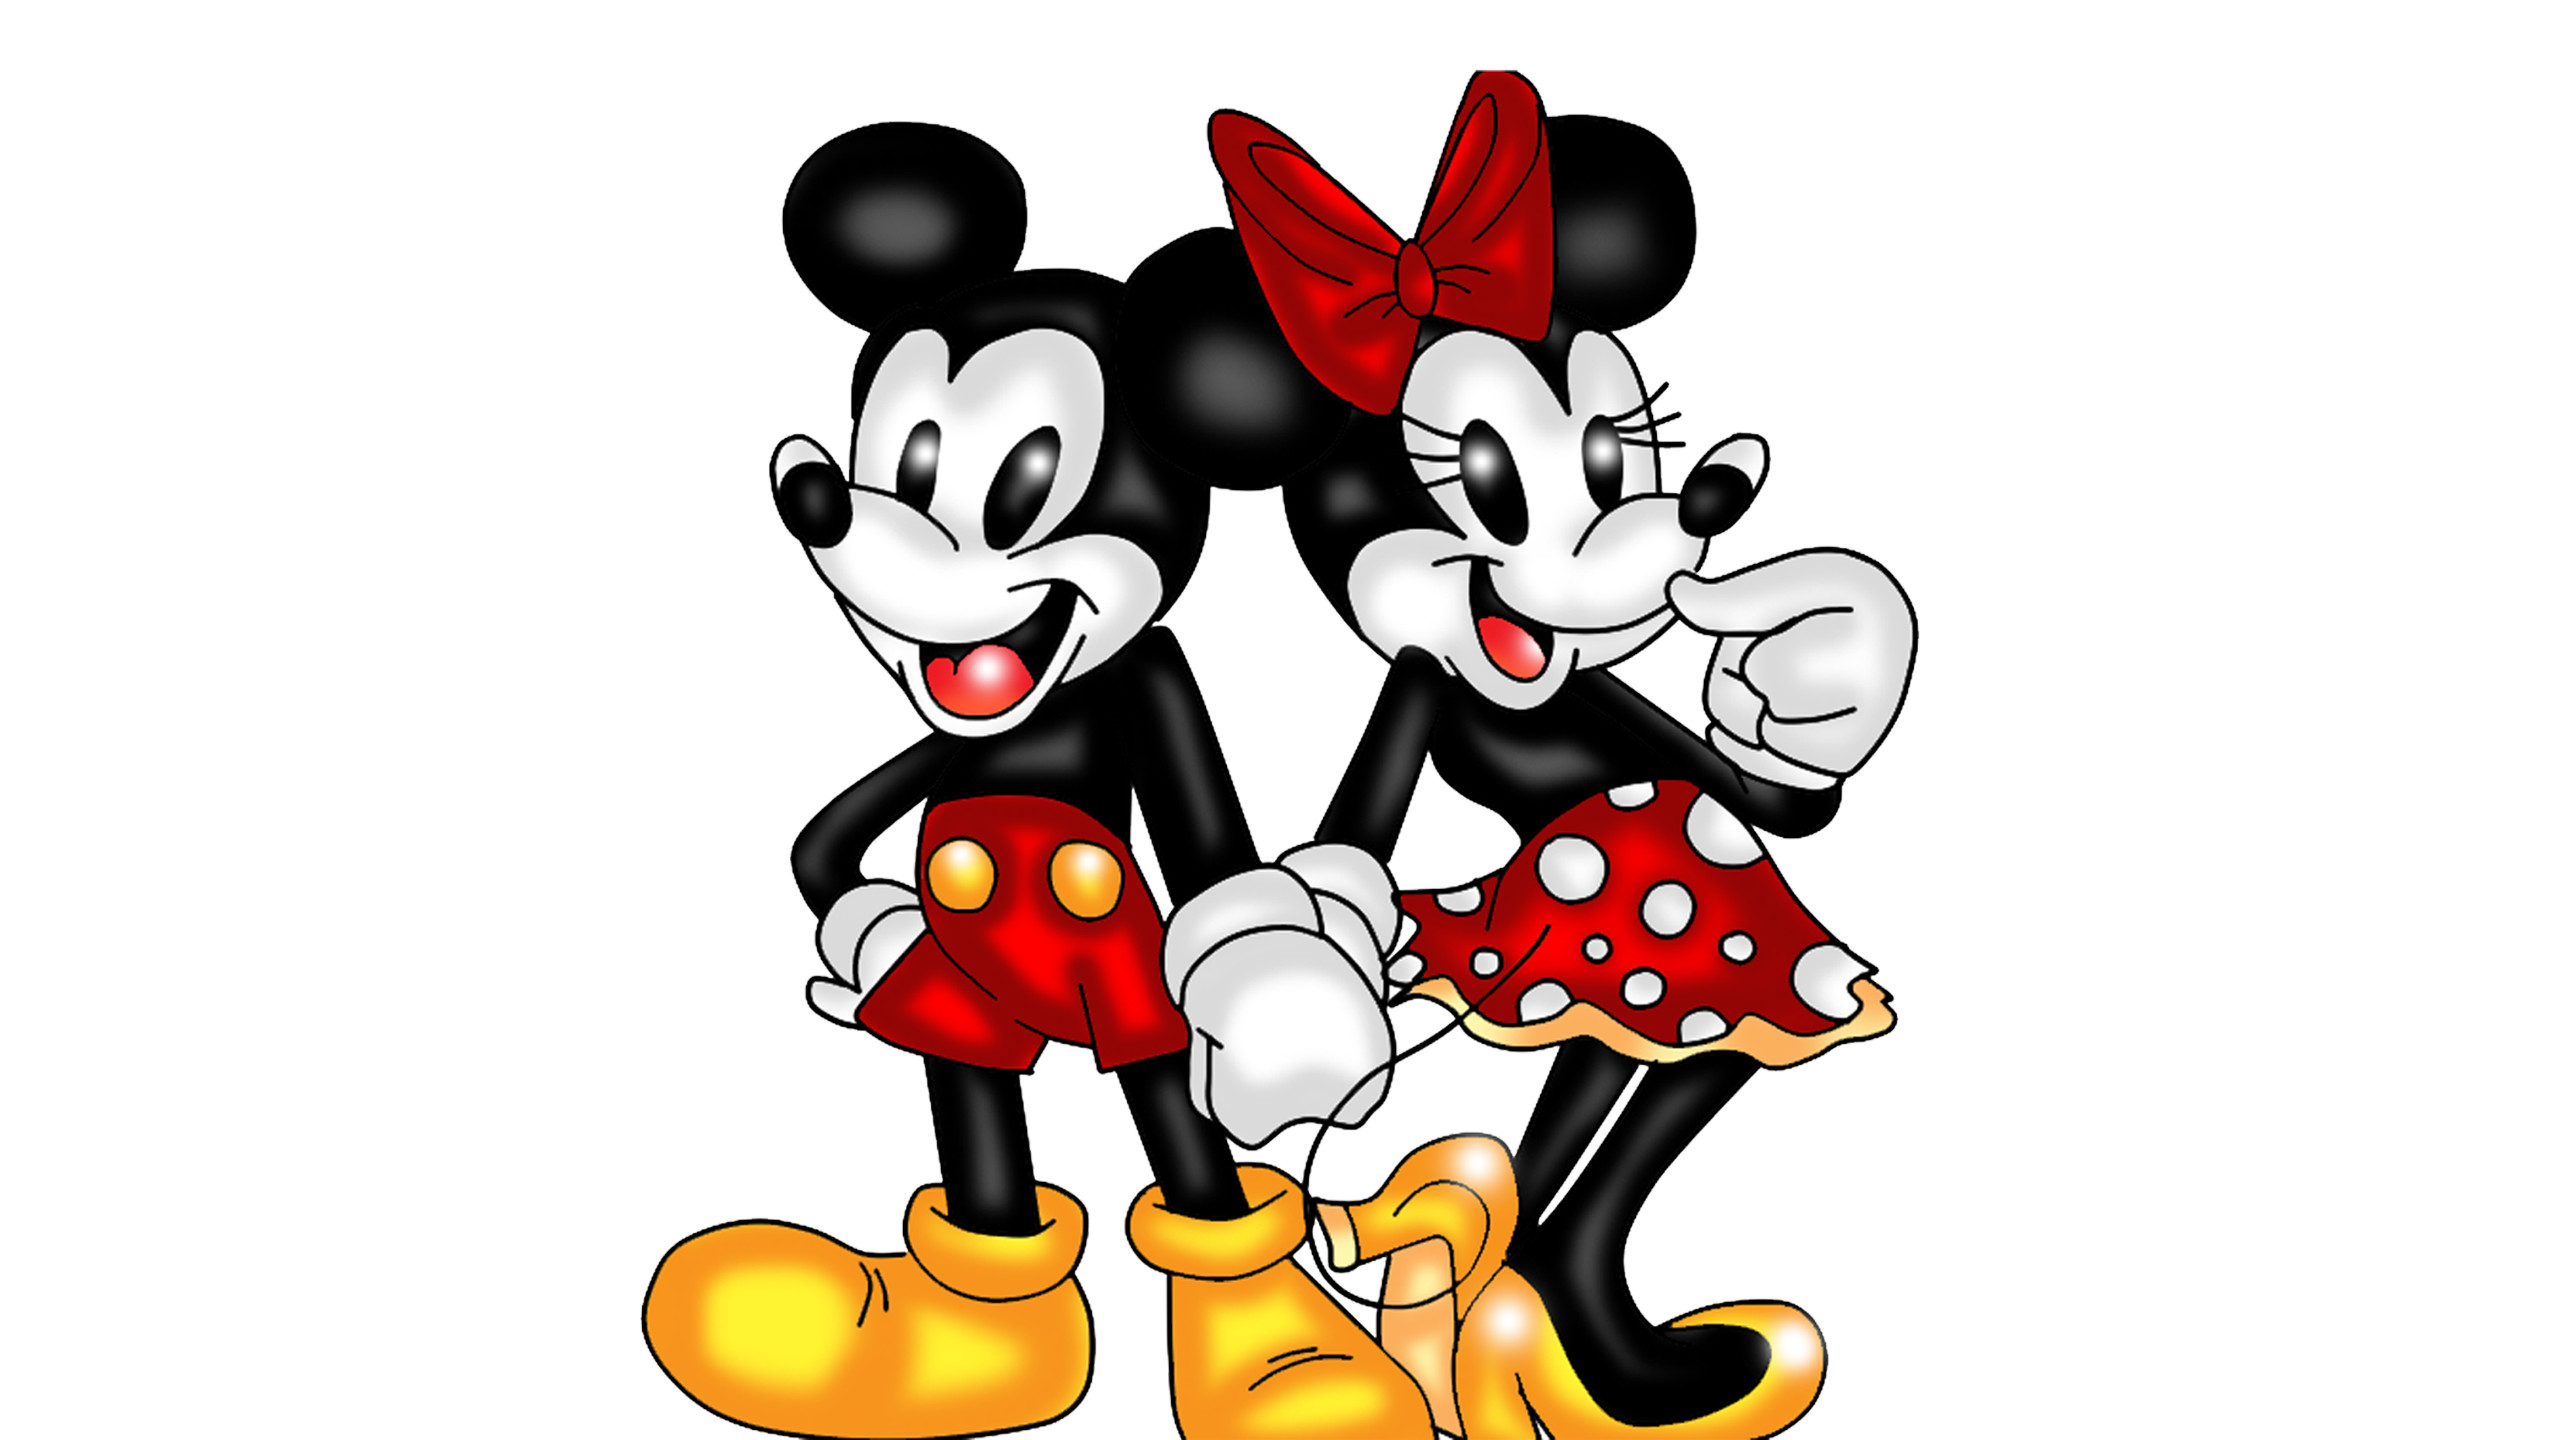 Mickey And Minnie Mouse Love Couple Wallpaper Hd - Mickey And Minnie Mouse Original - HD Wallpaper 